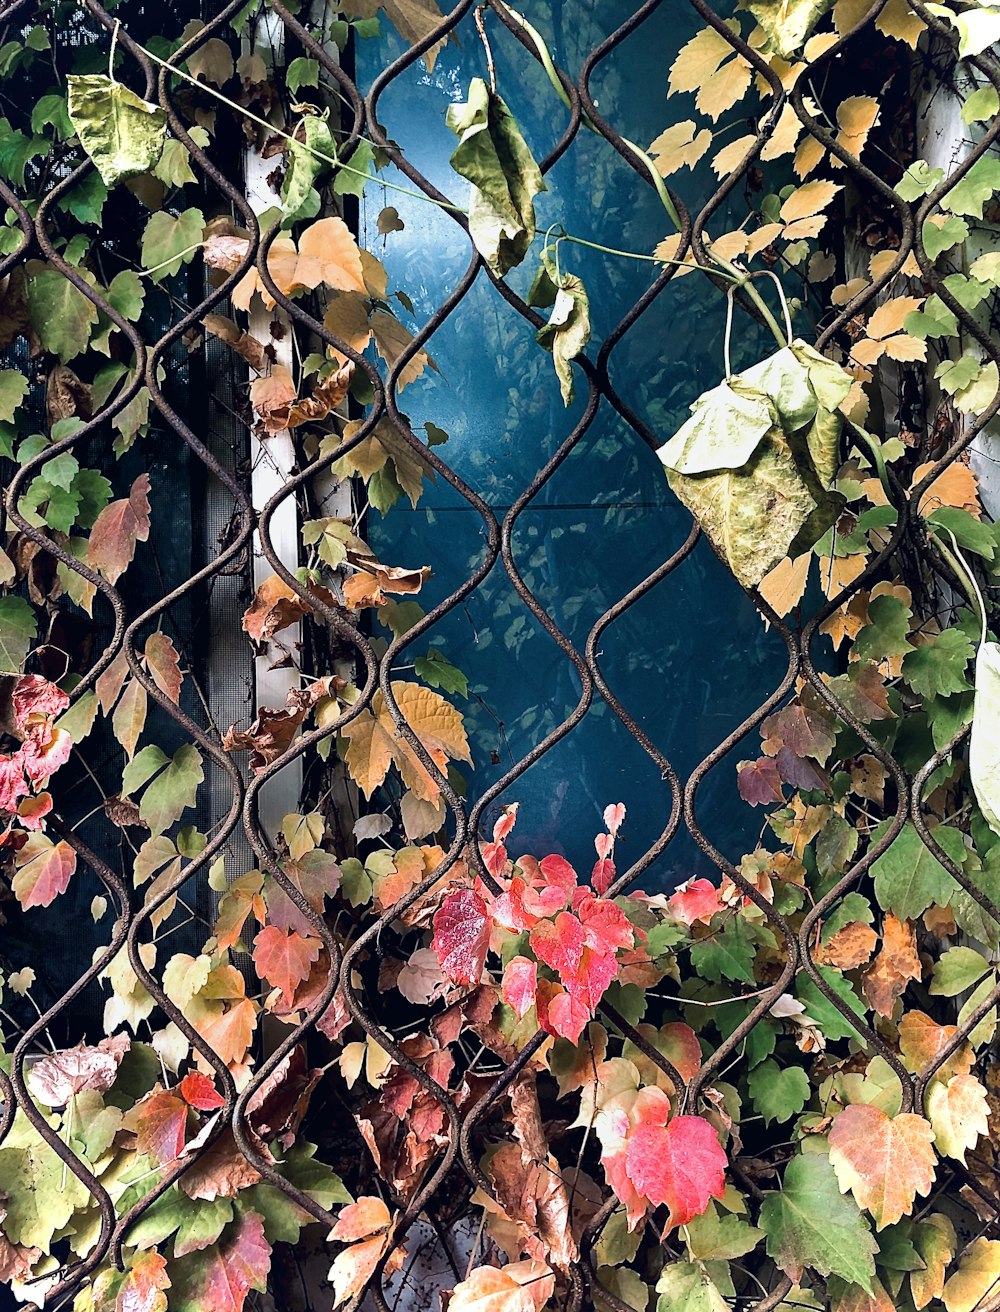 plants beside brown chainlink fence